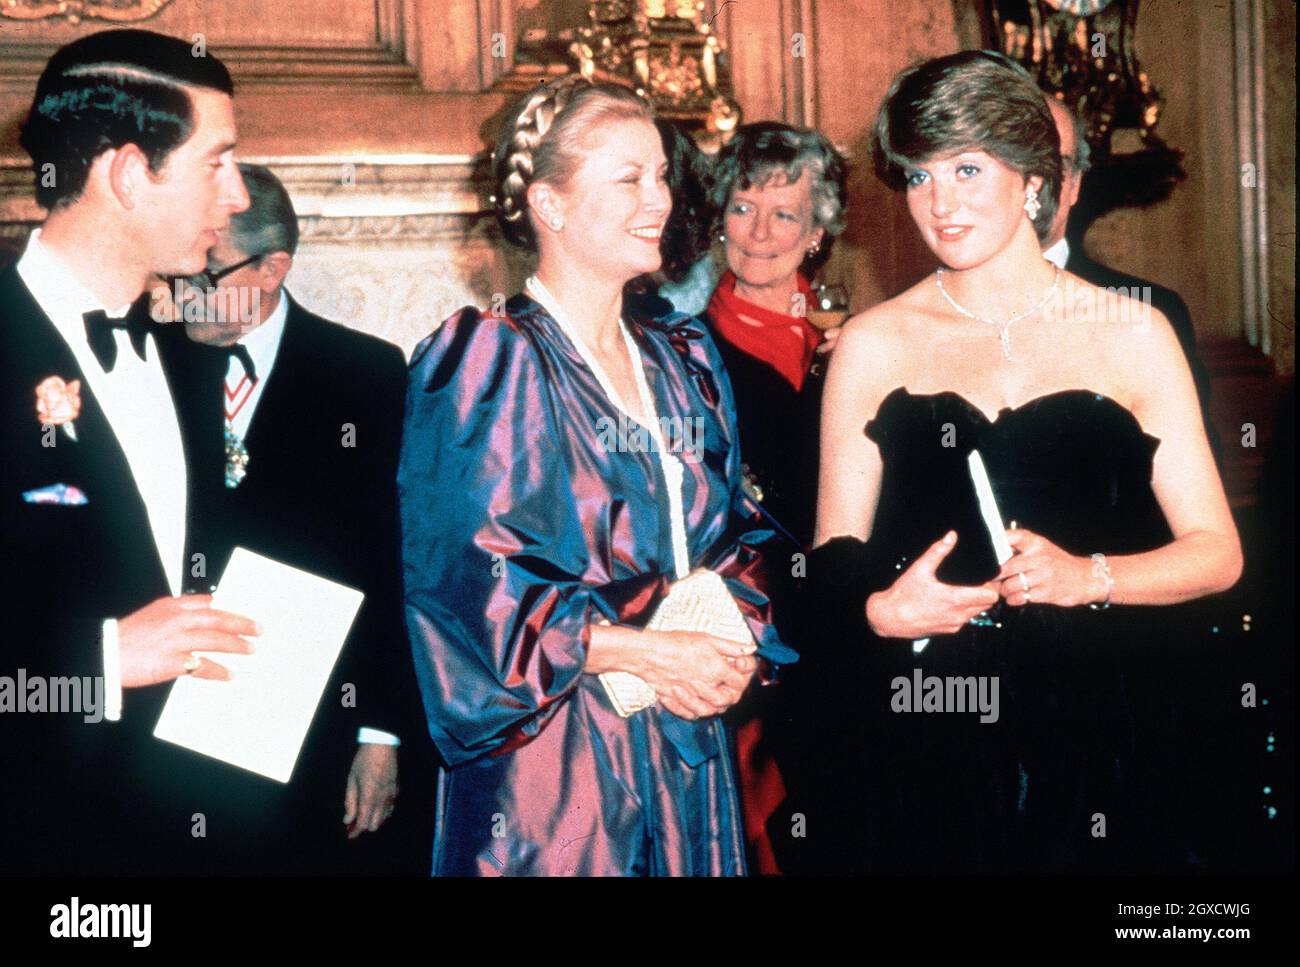 **FILE PHOTO** Lady Diana Spencer, later to become Diana, Princess of Wales, sets the flashbulbs popping as she wears a revealing Emanuel black dress attending her first official engagement with Prince Charles, and Princess Grace of Monaco, at a fundraising concert at the Goldsmiths Hall in London in March 1981. Designers Elizabeth and David Emanuel are holding an auction of dresses worn by the late Princess Diana. The dresses are to go up for auction on June 8, 2010 in London, at specialist vintage fashion auctioneers Kerry Taylor Auctions.  Stock Photo